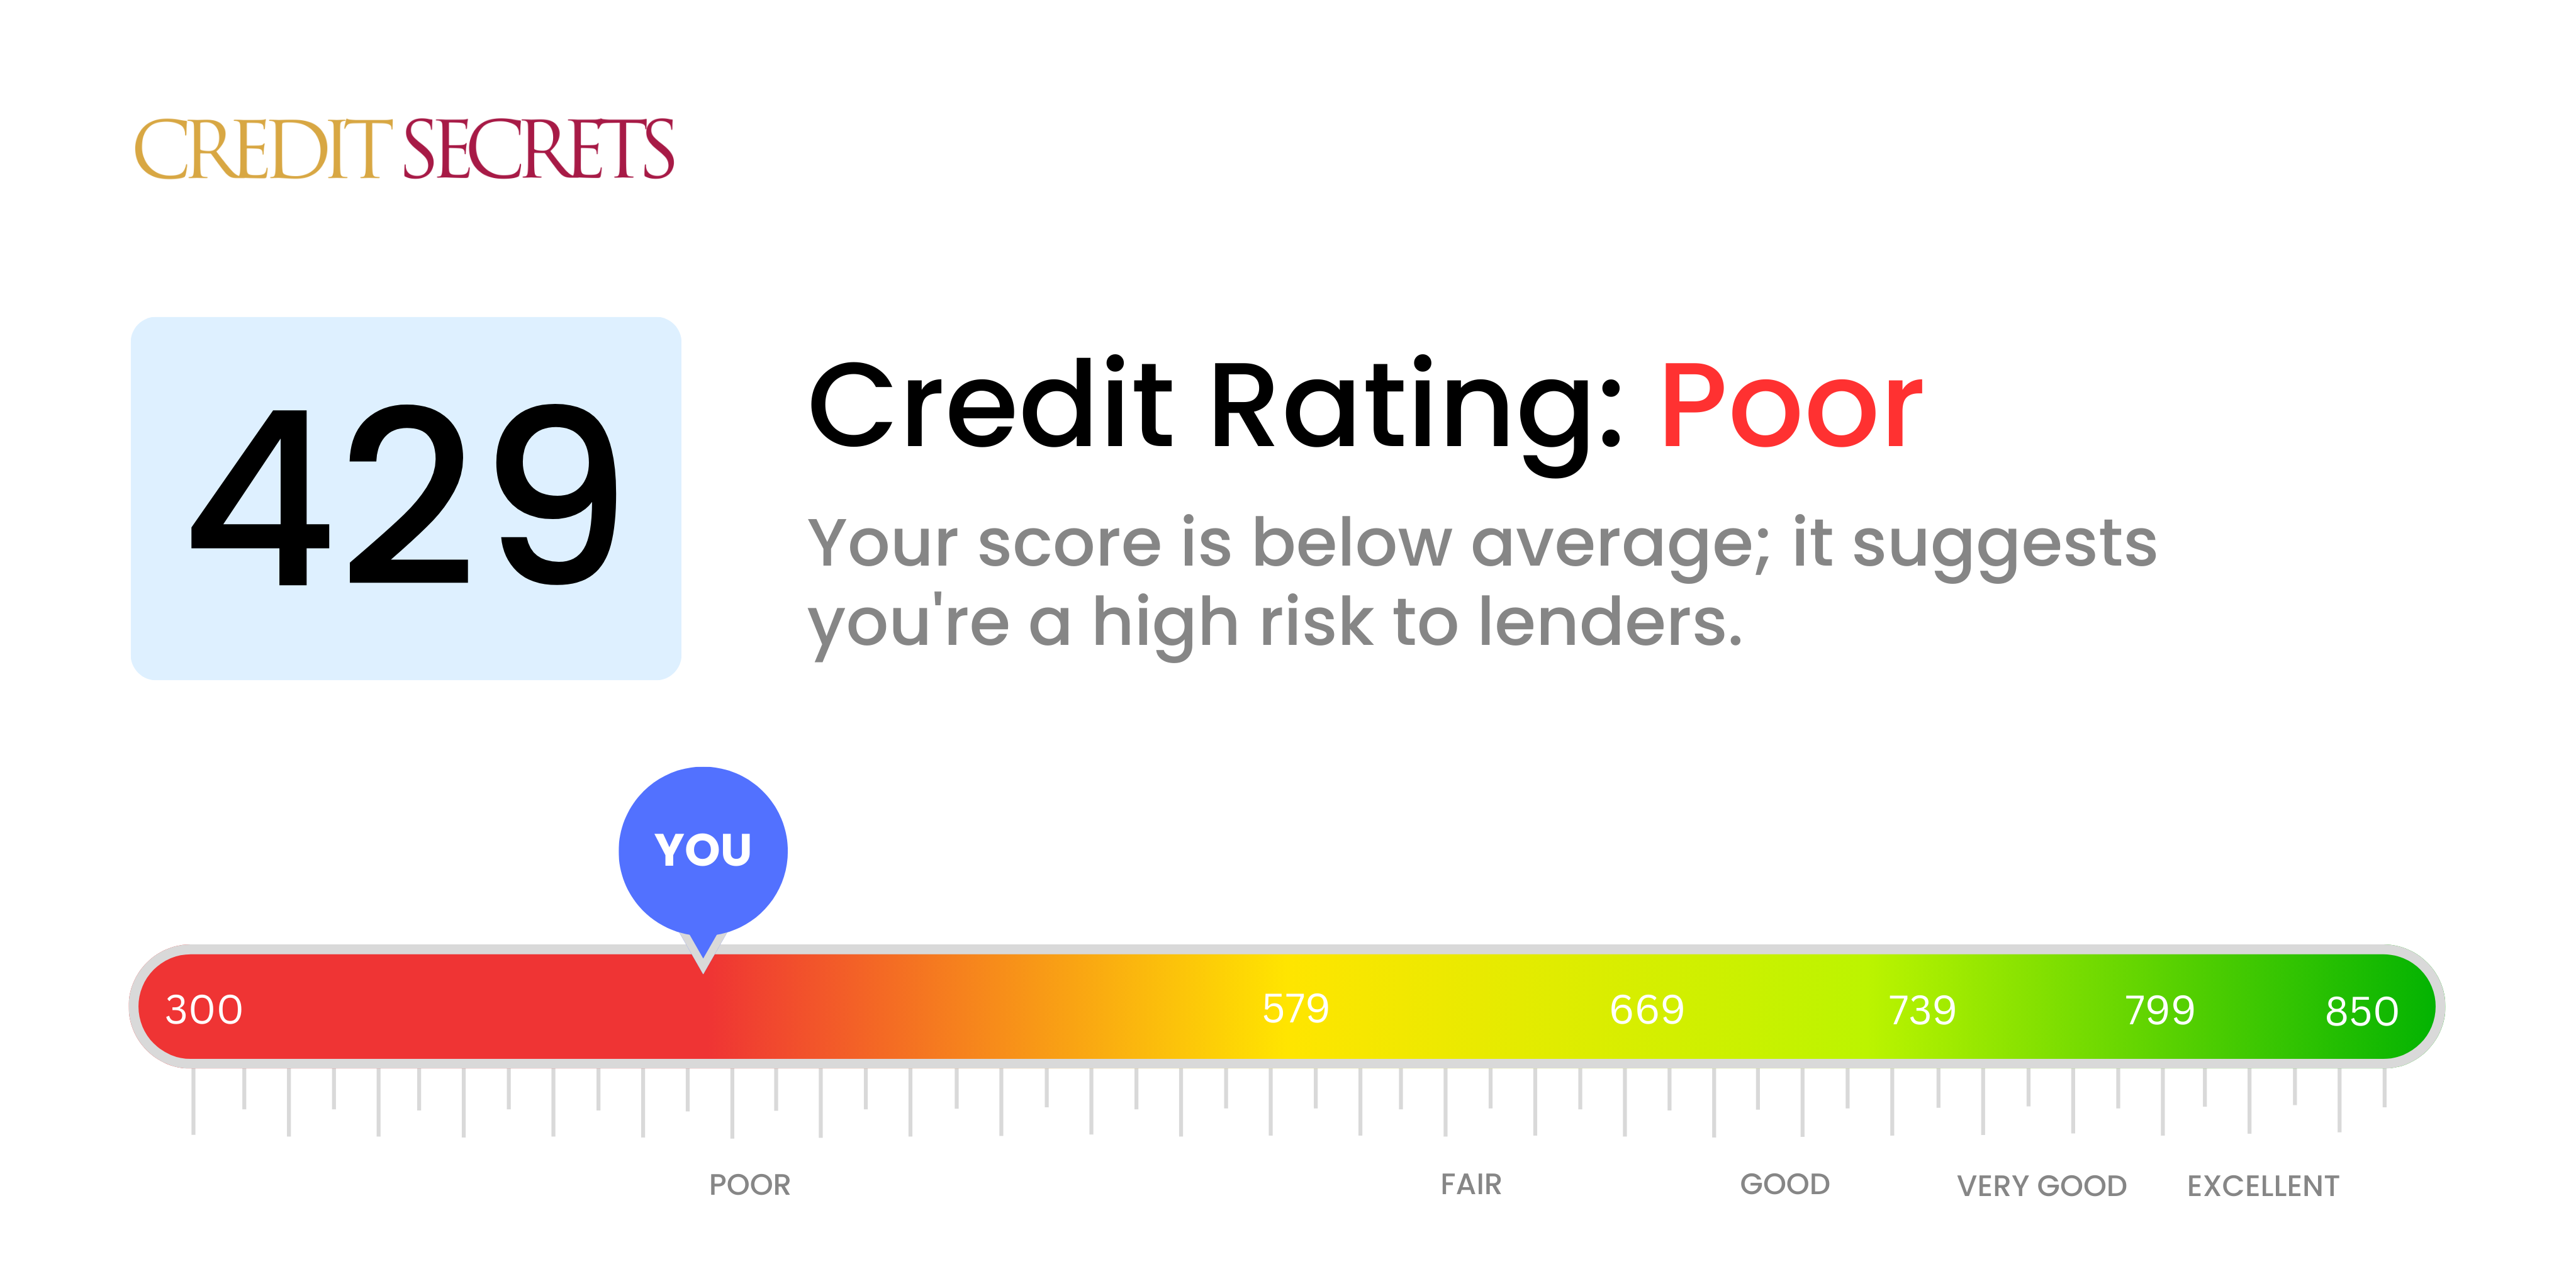 Is 429 a good credit score?